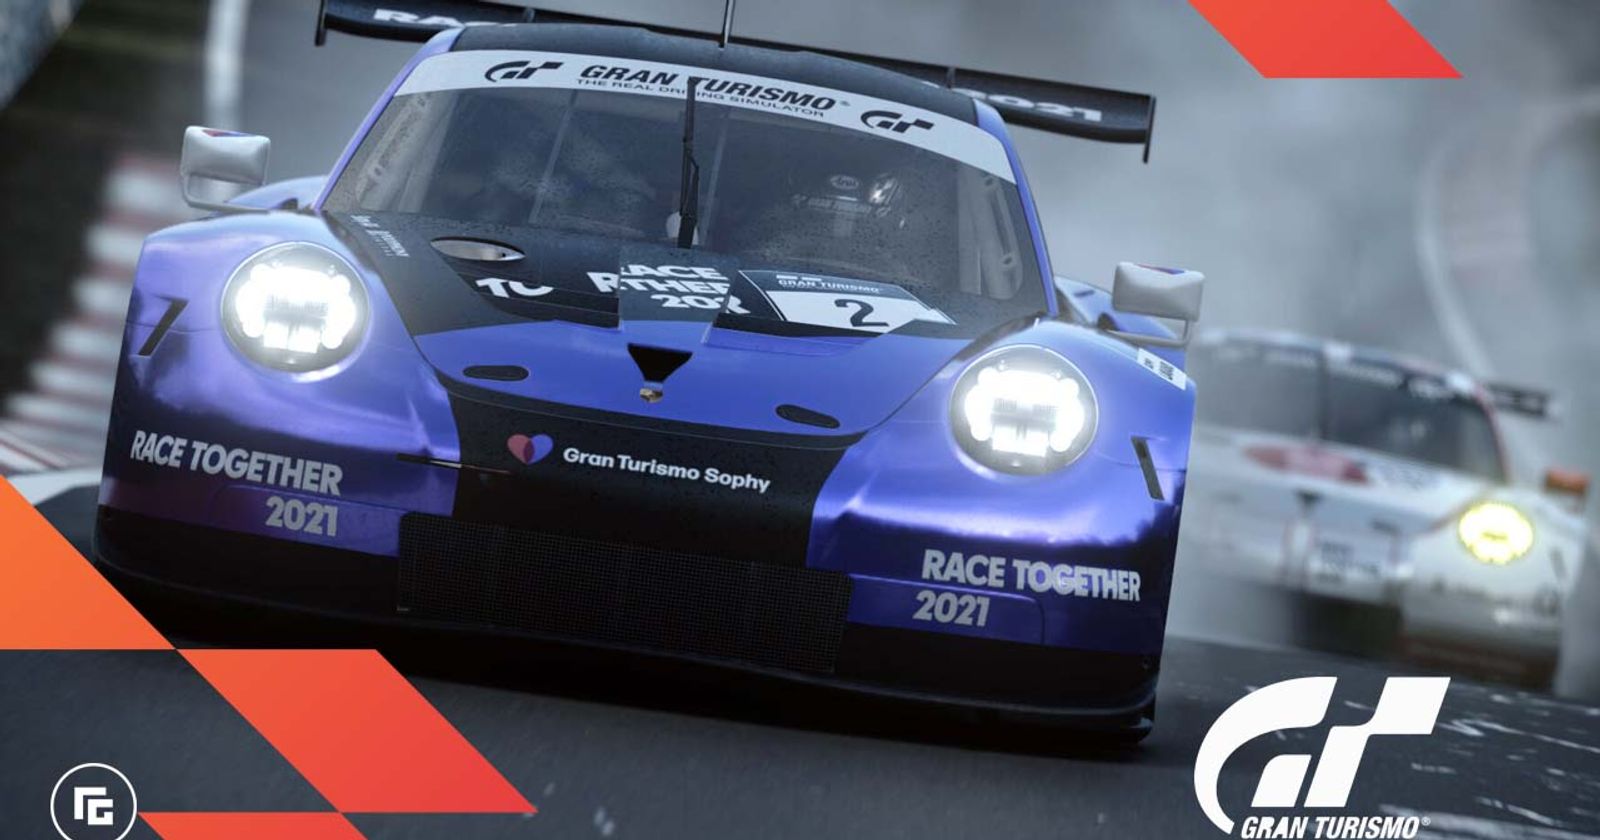 AI-Powered GT Sophy 2.0 Joins The Race In Gran Turismo 7 